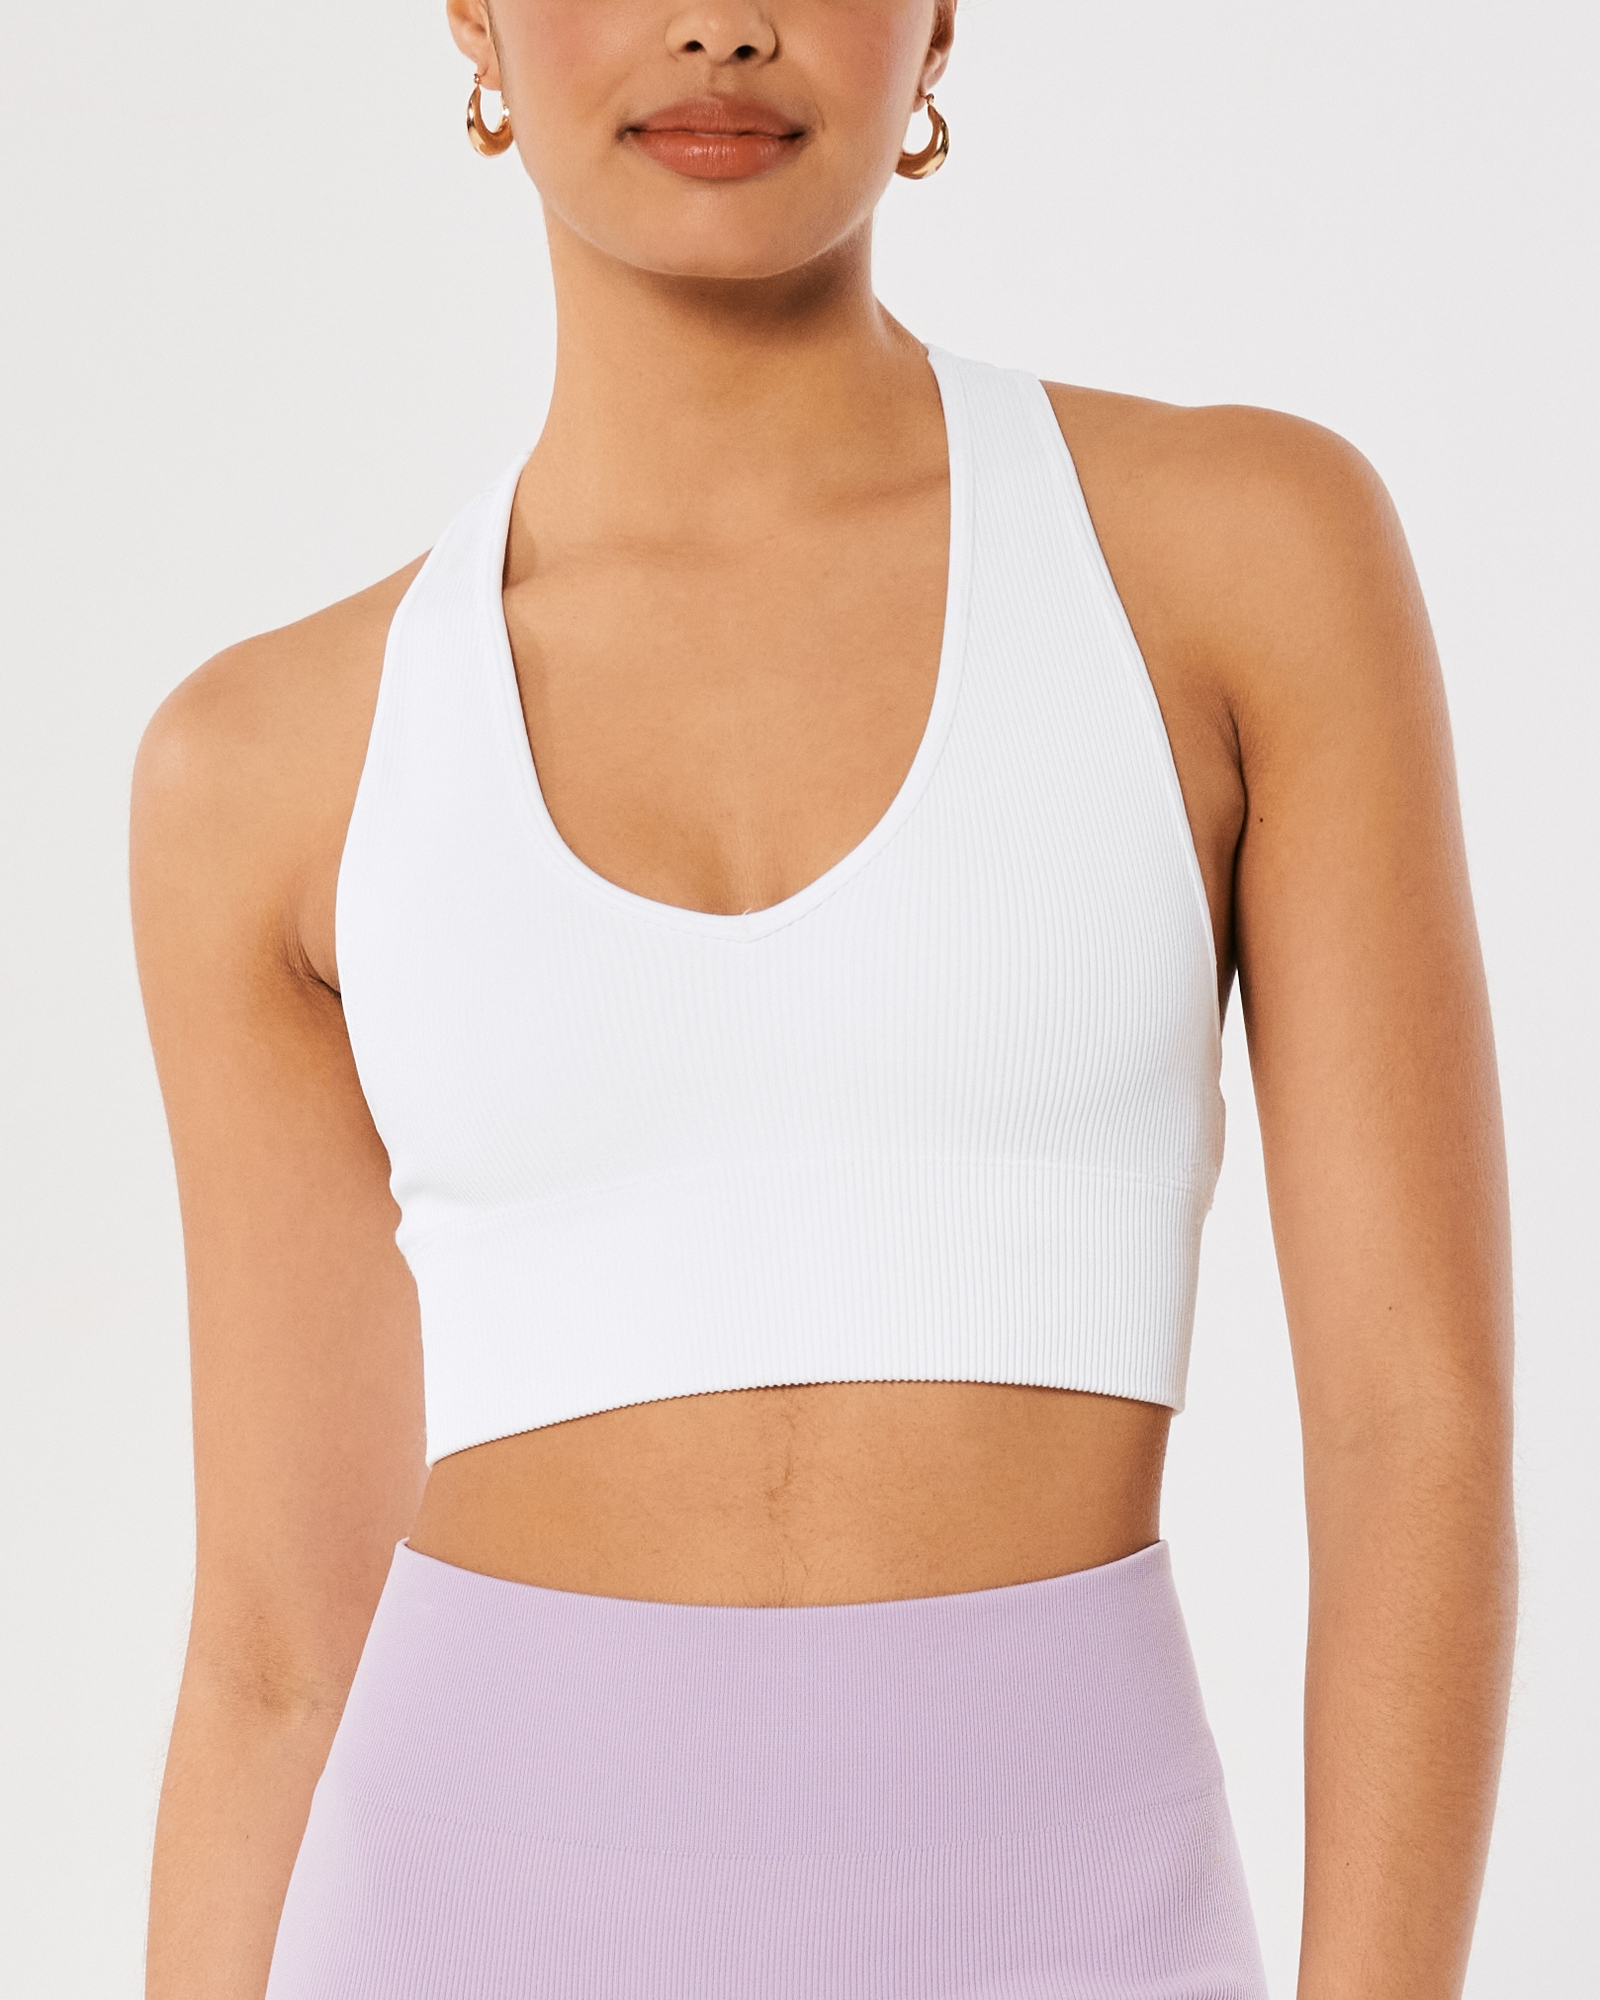 Women's Gilly Hicks Active Seamless Ribbed Plunge Sports Bra, Women's Sale